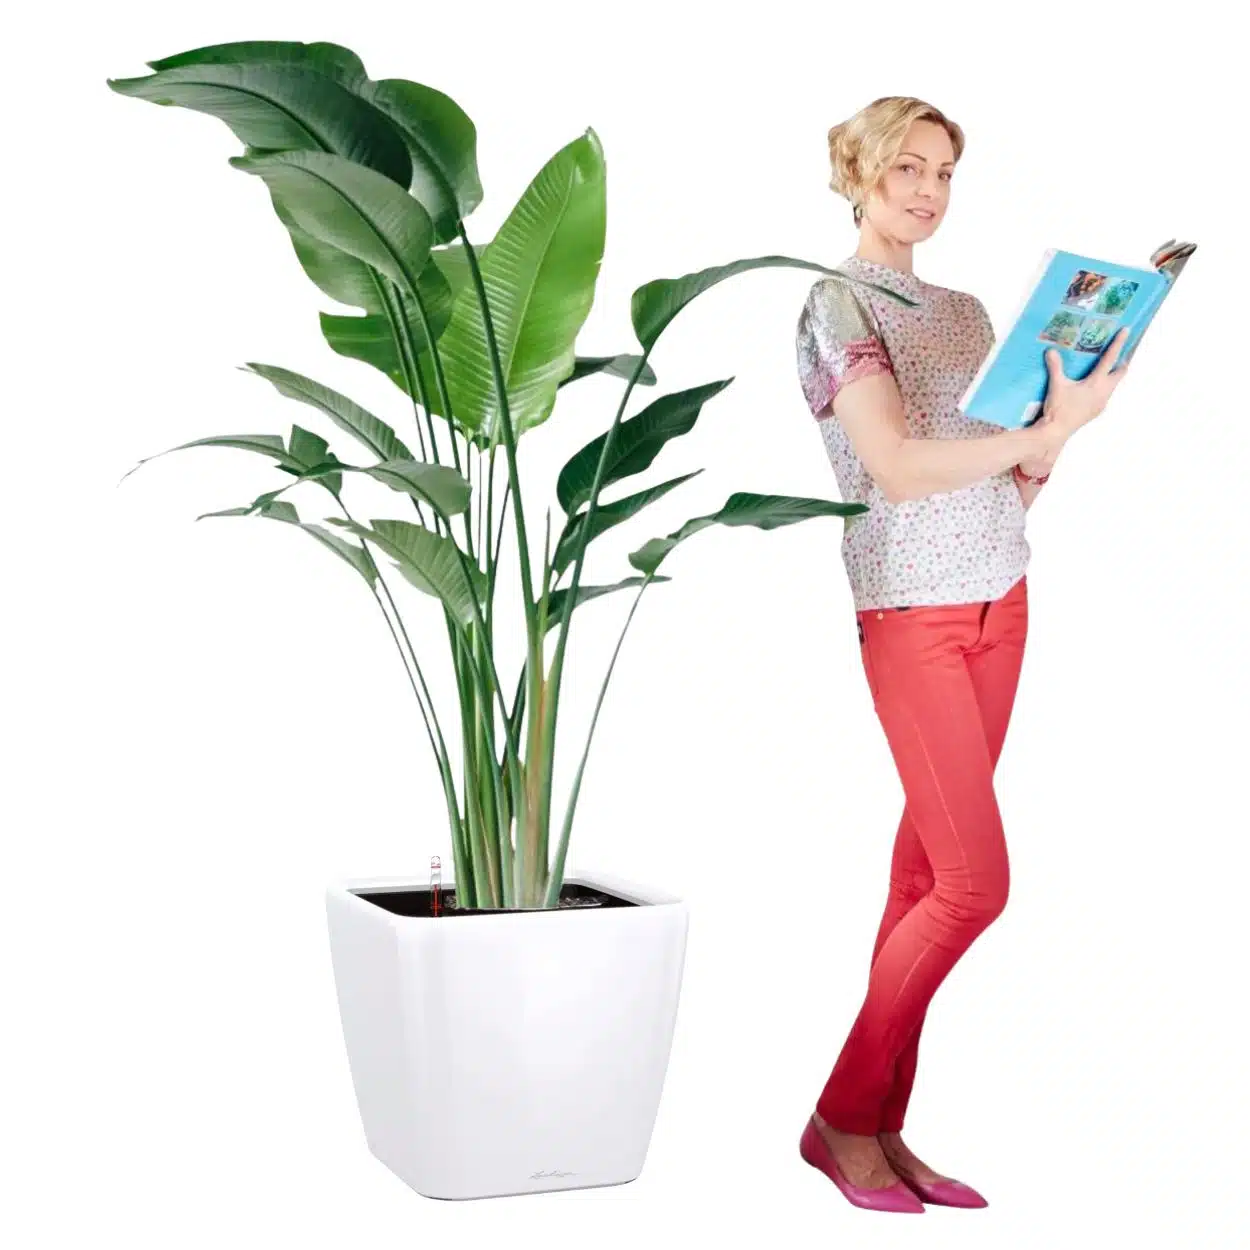 Juliette, the founder of My City Plants, standing with a book next to extra large Bird of Paradise plant potted in Lechuza Quadro 50 white planter